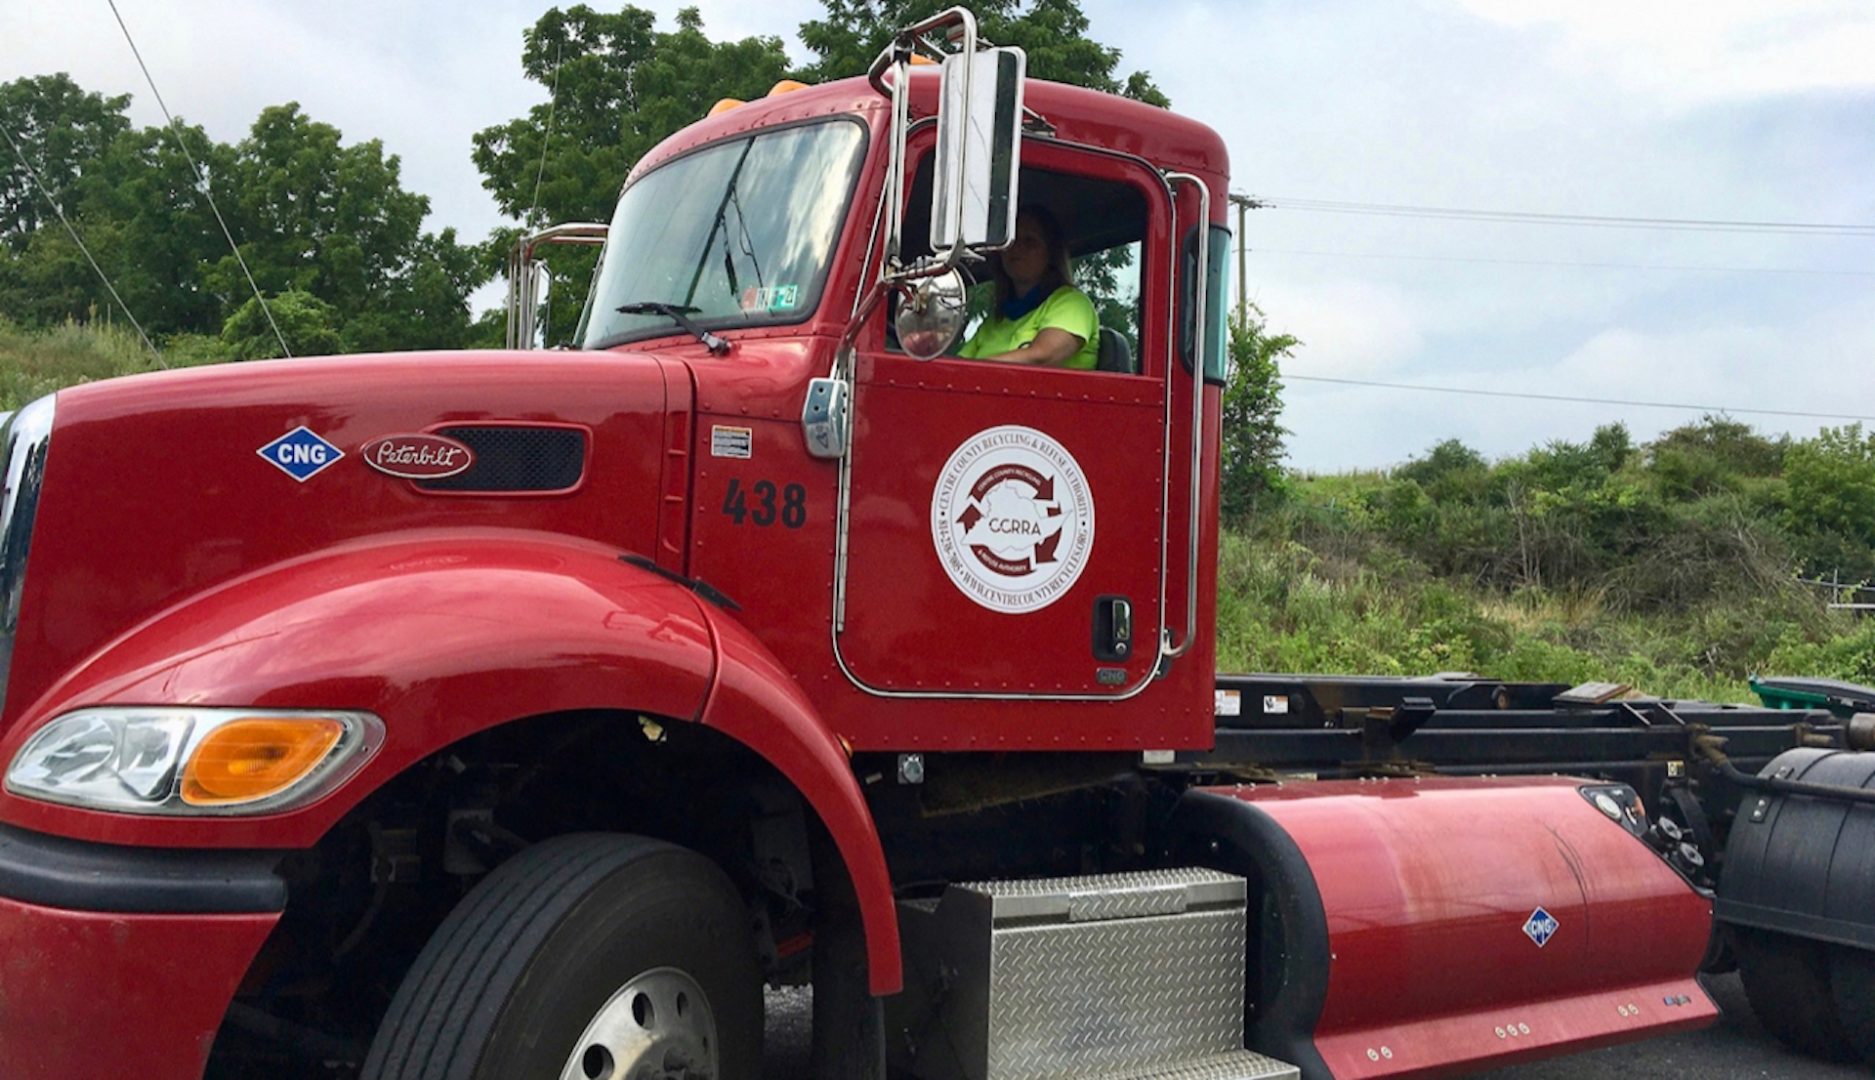 One of the Centre County Recycling and Refuse Authority's trucks that run on compressed natural gas on July 22, 2020. The authority is one of the agencies and businesses getting funding from the state Departme